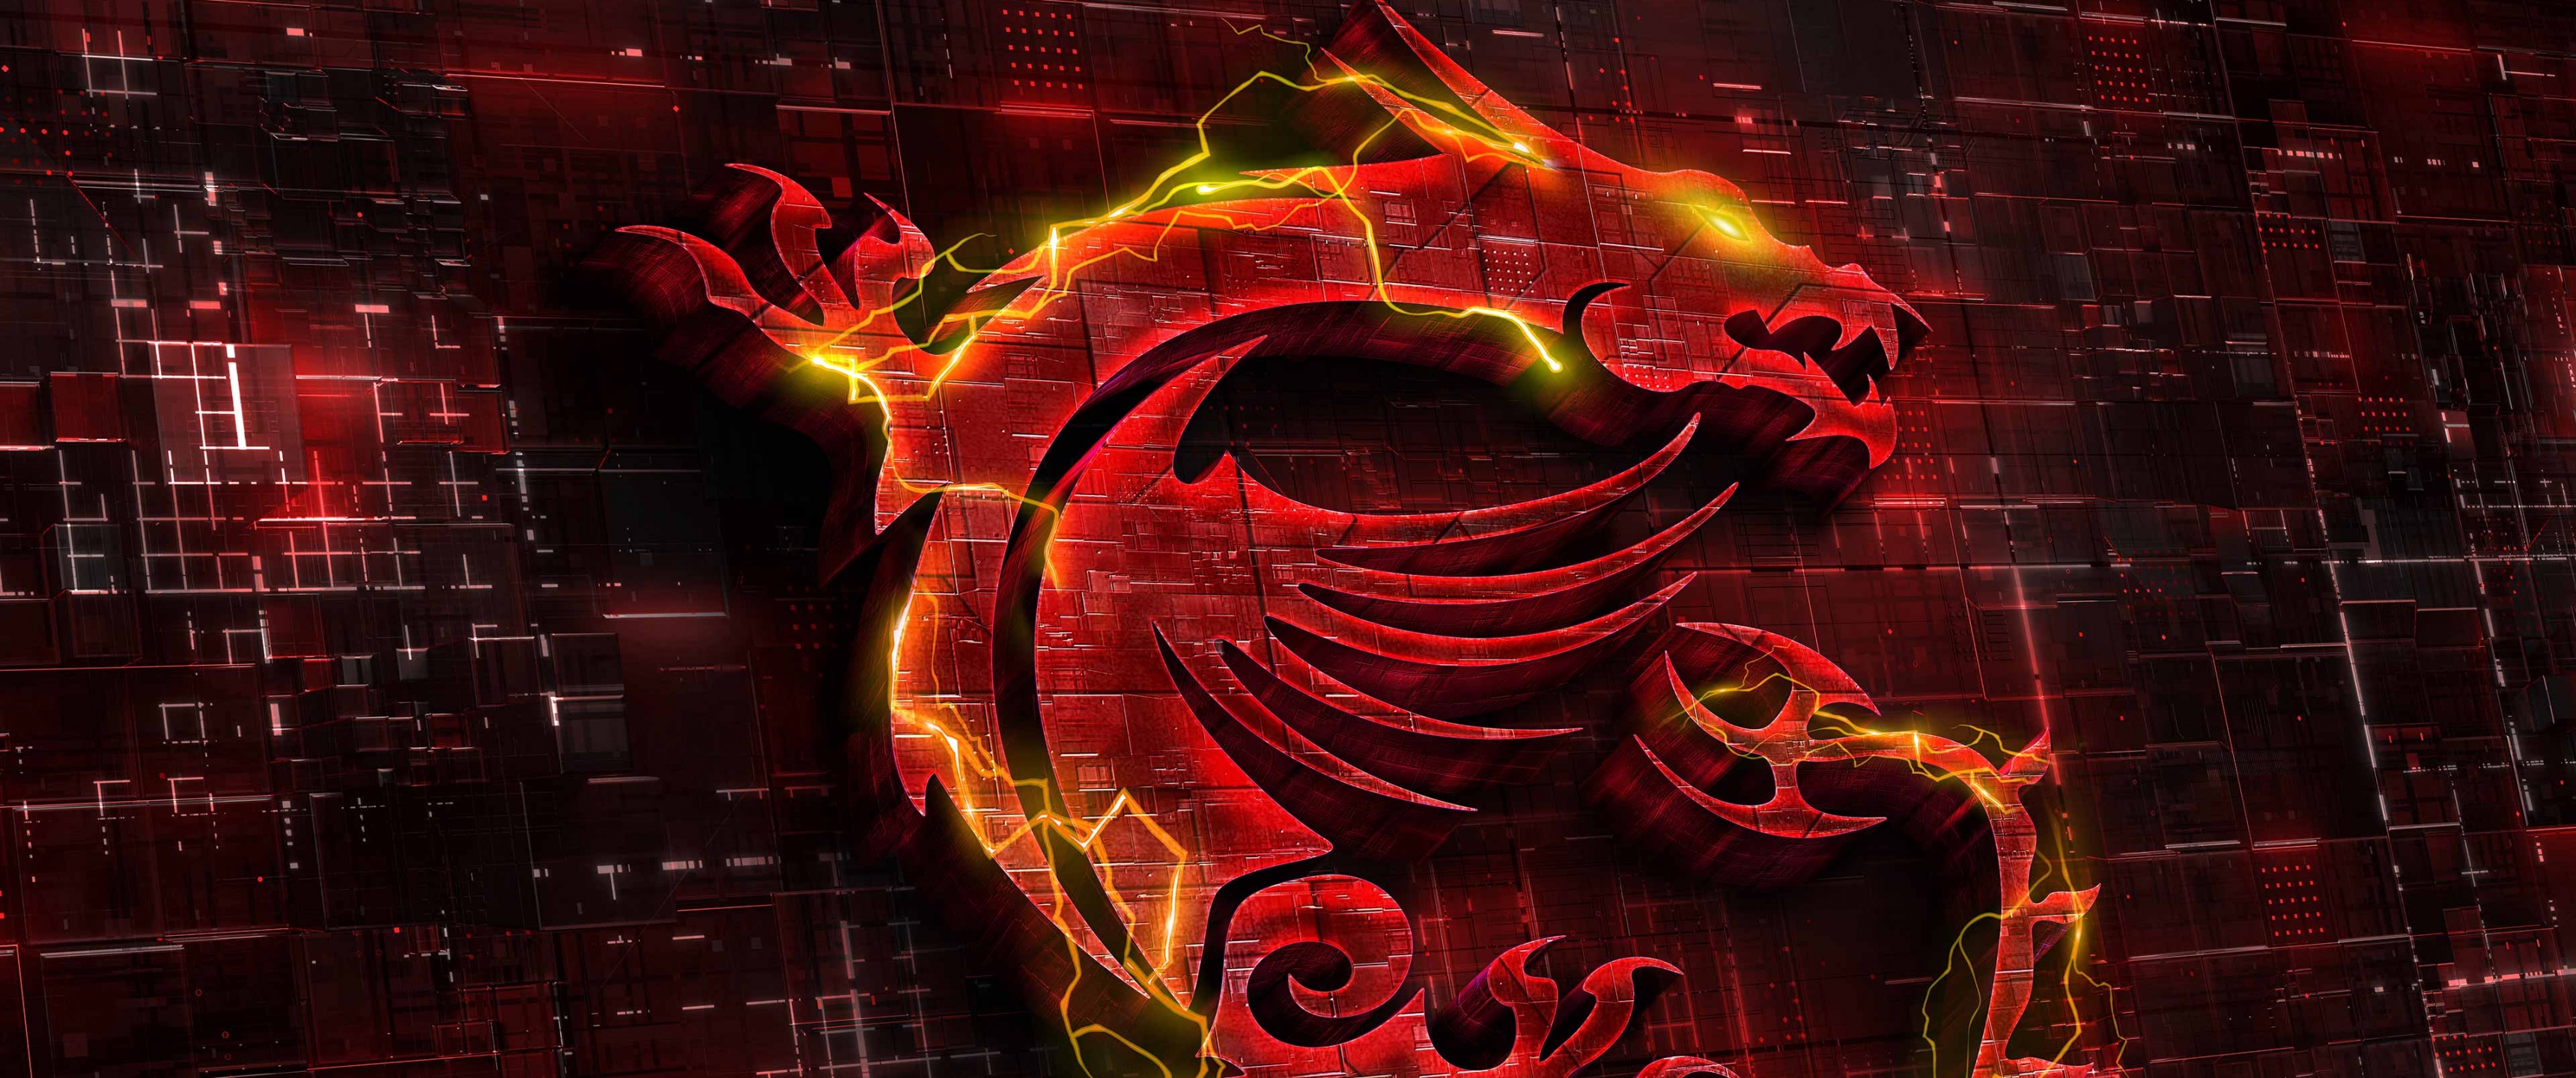 MSI Gaming Wallpaper 4K, Dragon, Fire, Red background